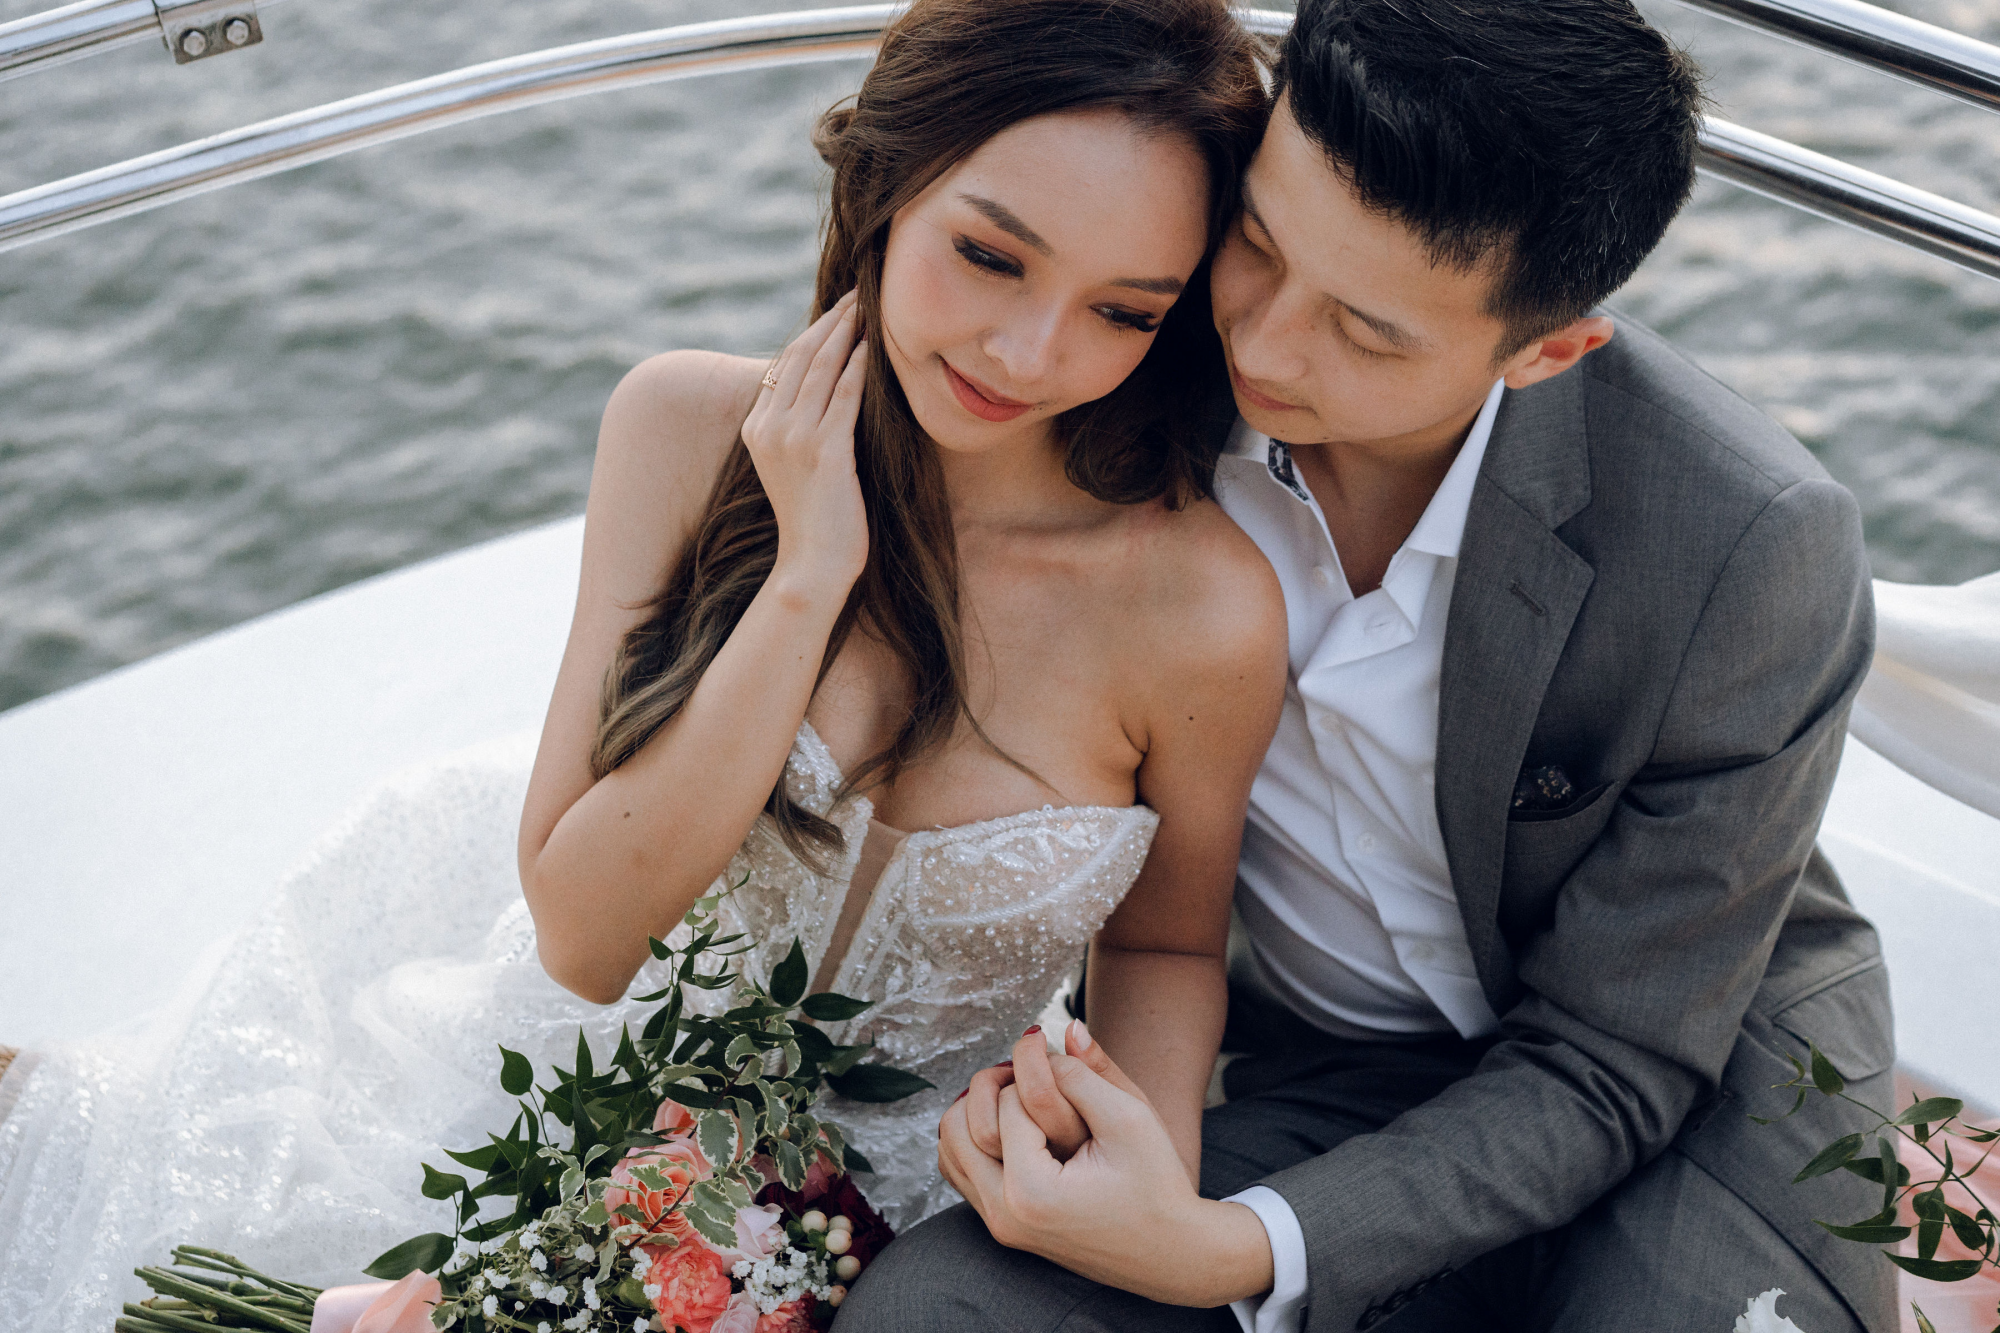 Sunset Prewedding Photoshoot On A Yacht With Romantic Floral Styling by Samantha on OneThreeOneFour 21